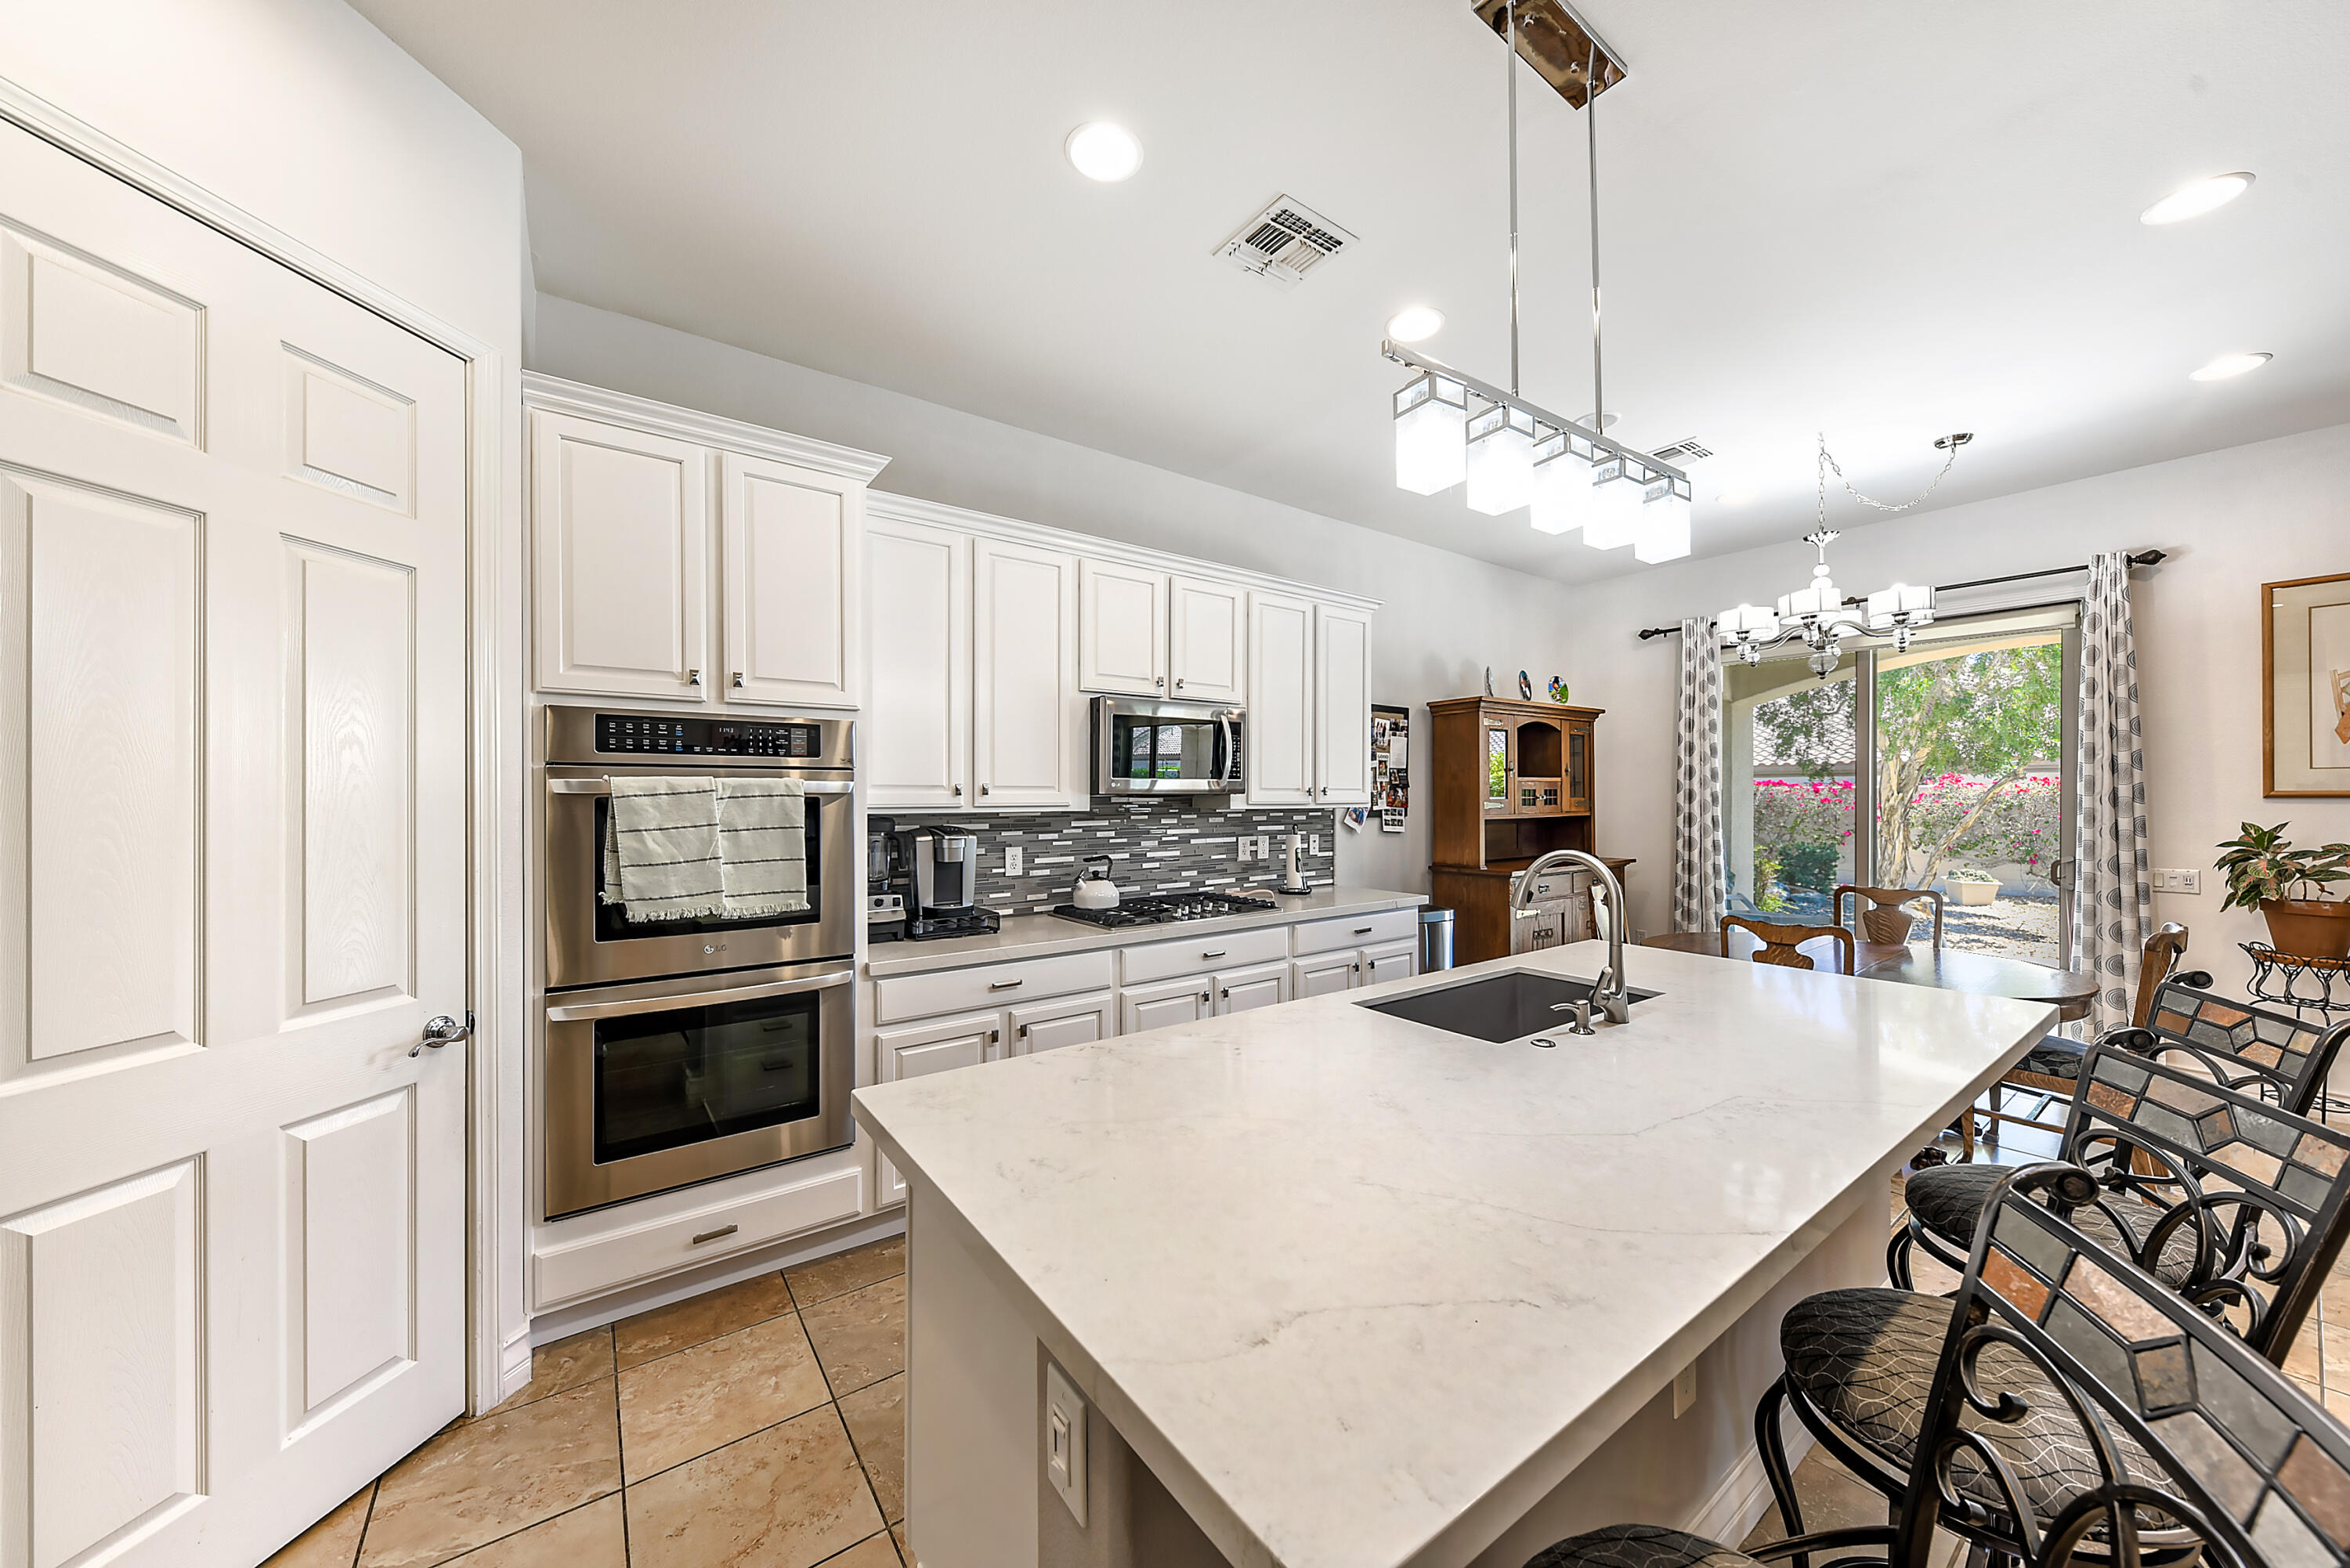 a kitchen with stainless steel appliances kitchen island granite countertop a stove a sink a microwave a dining table and chairs with white cabinets